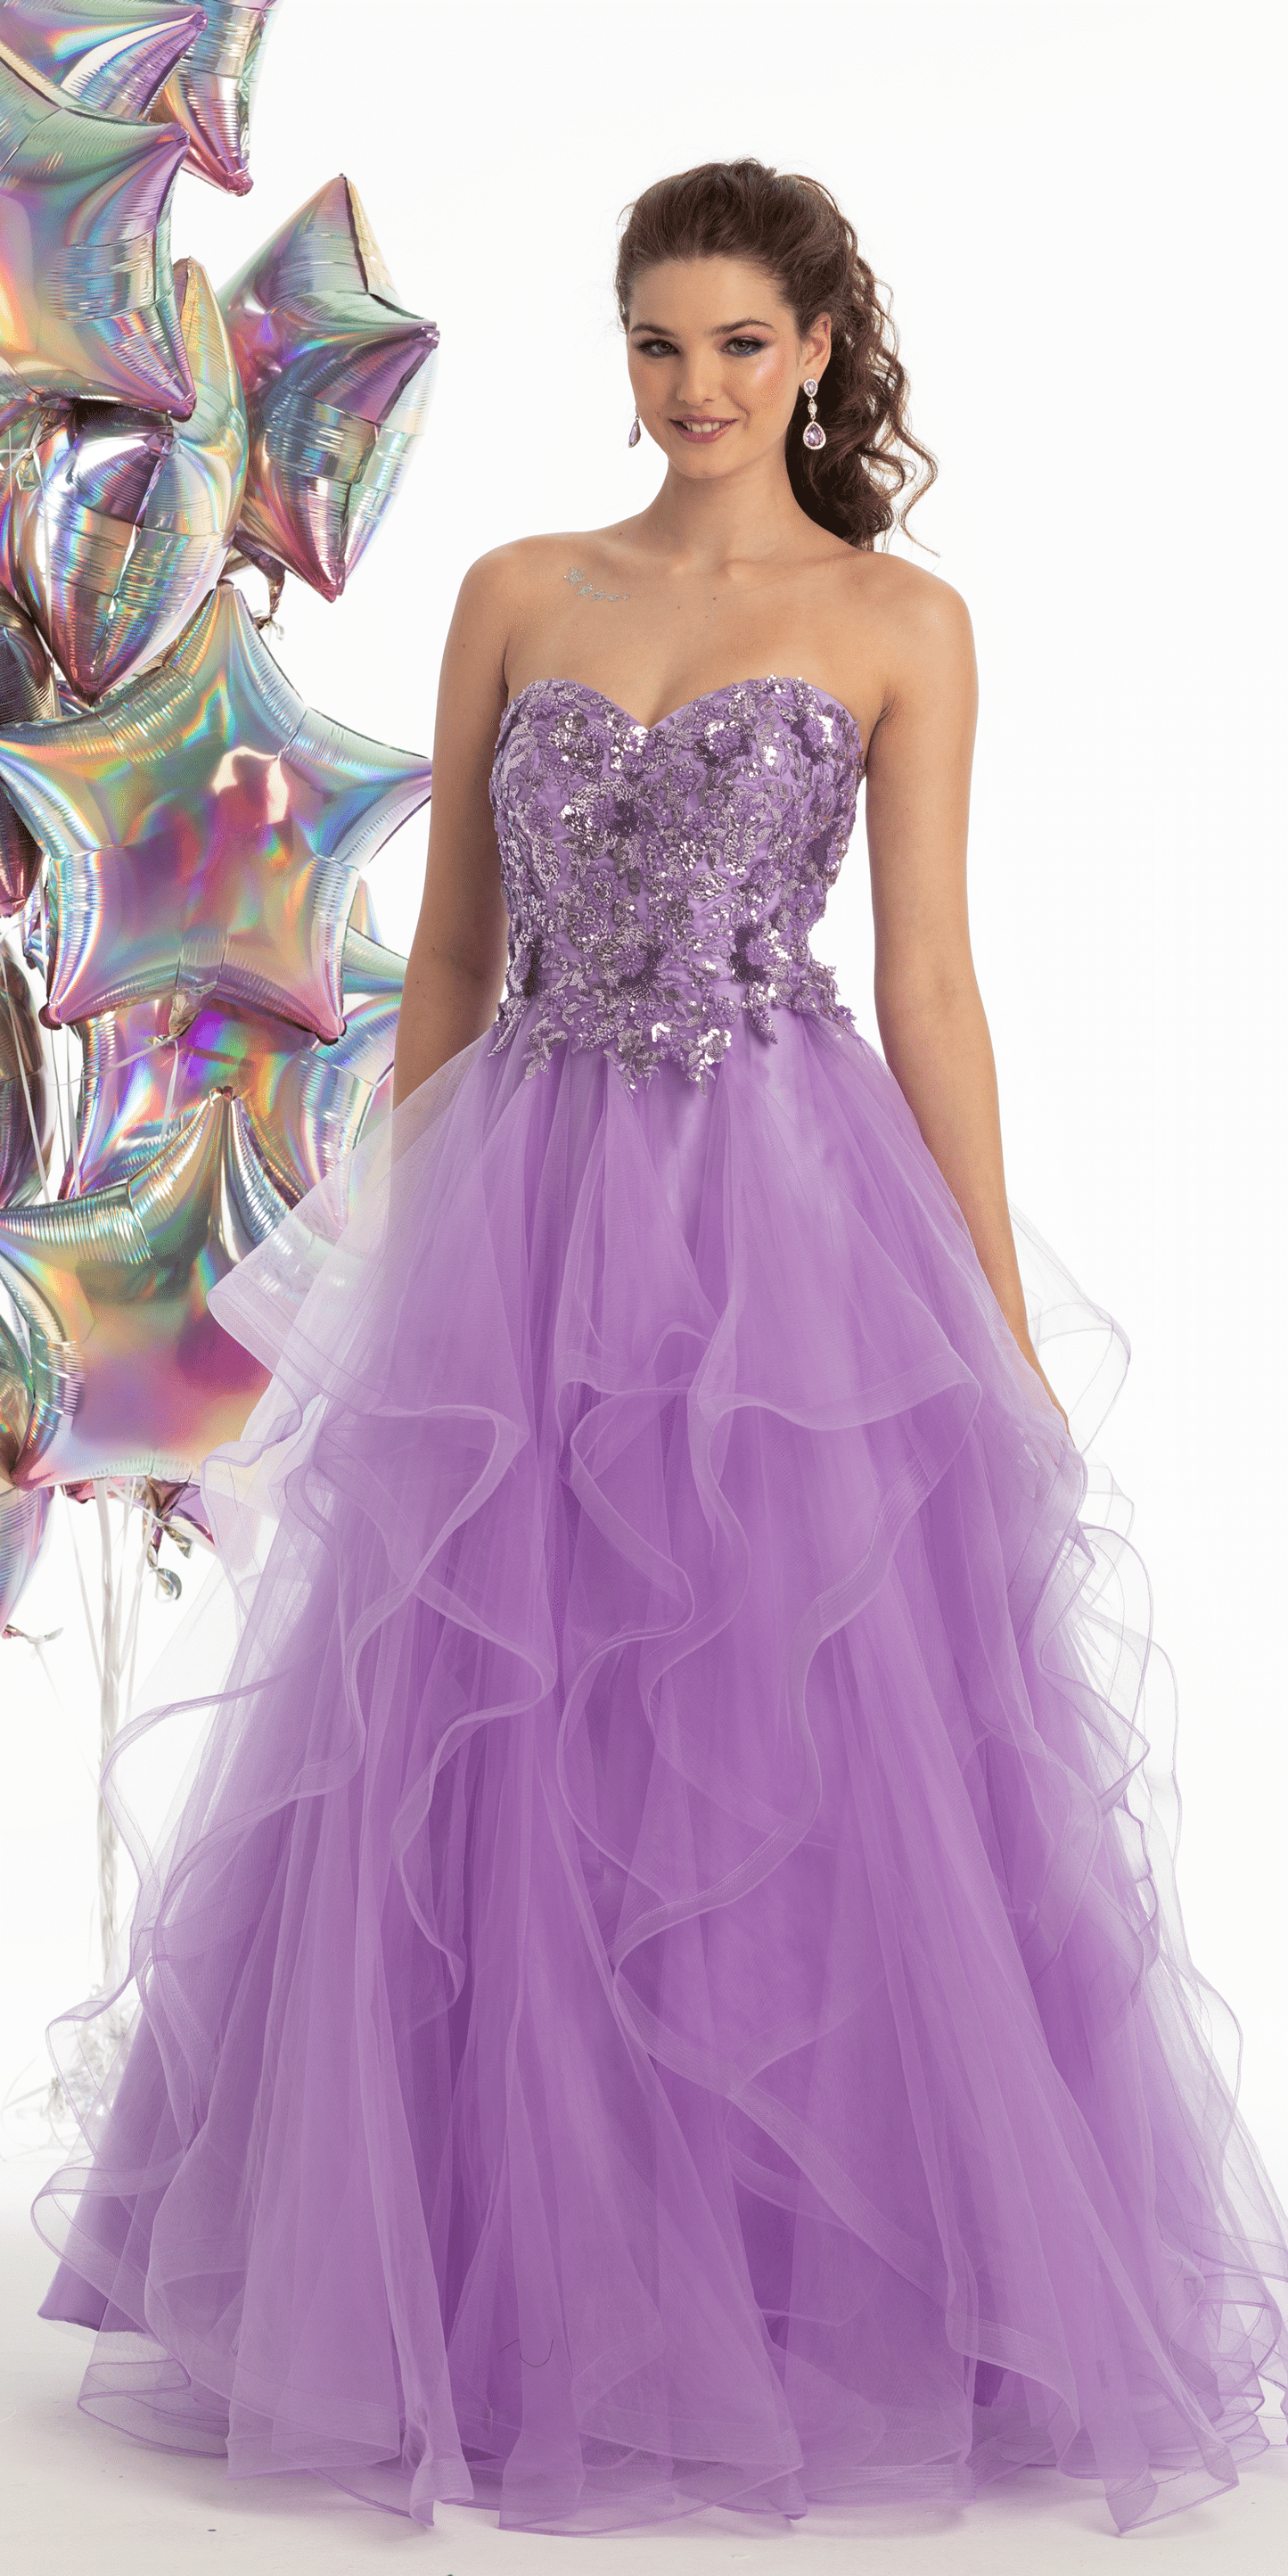 Camille La Vie Tulle Sweetheart Floral Sequin Tiered Ballgown missy / 00 / lilac